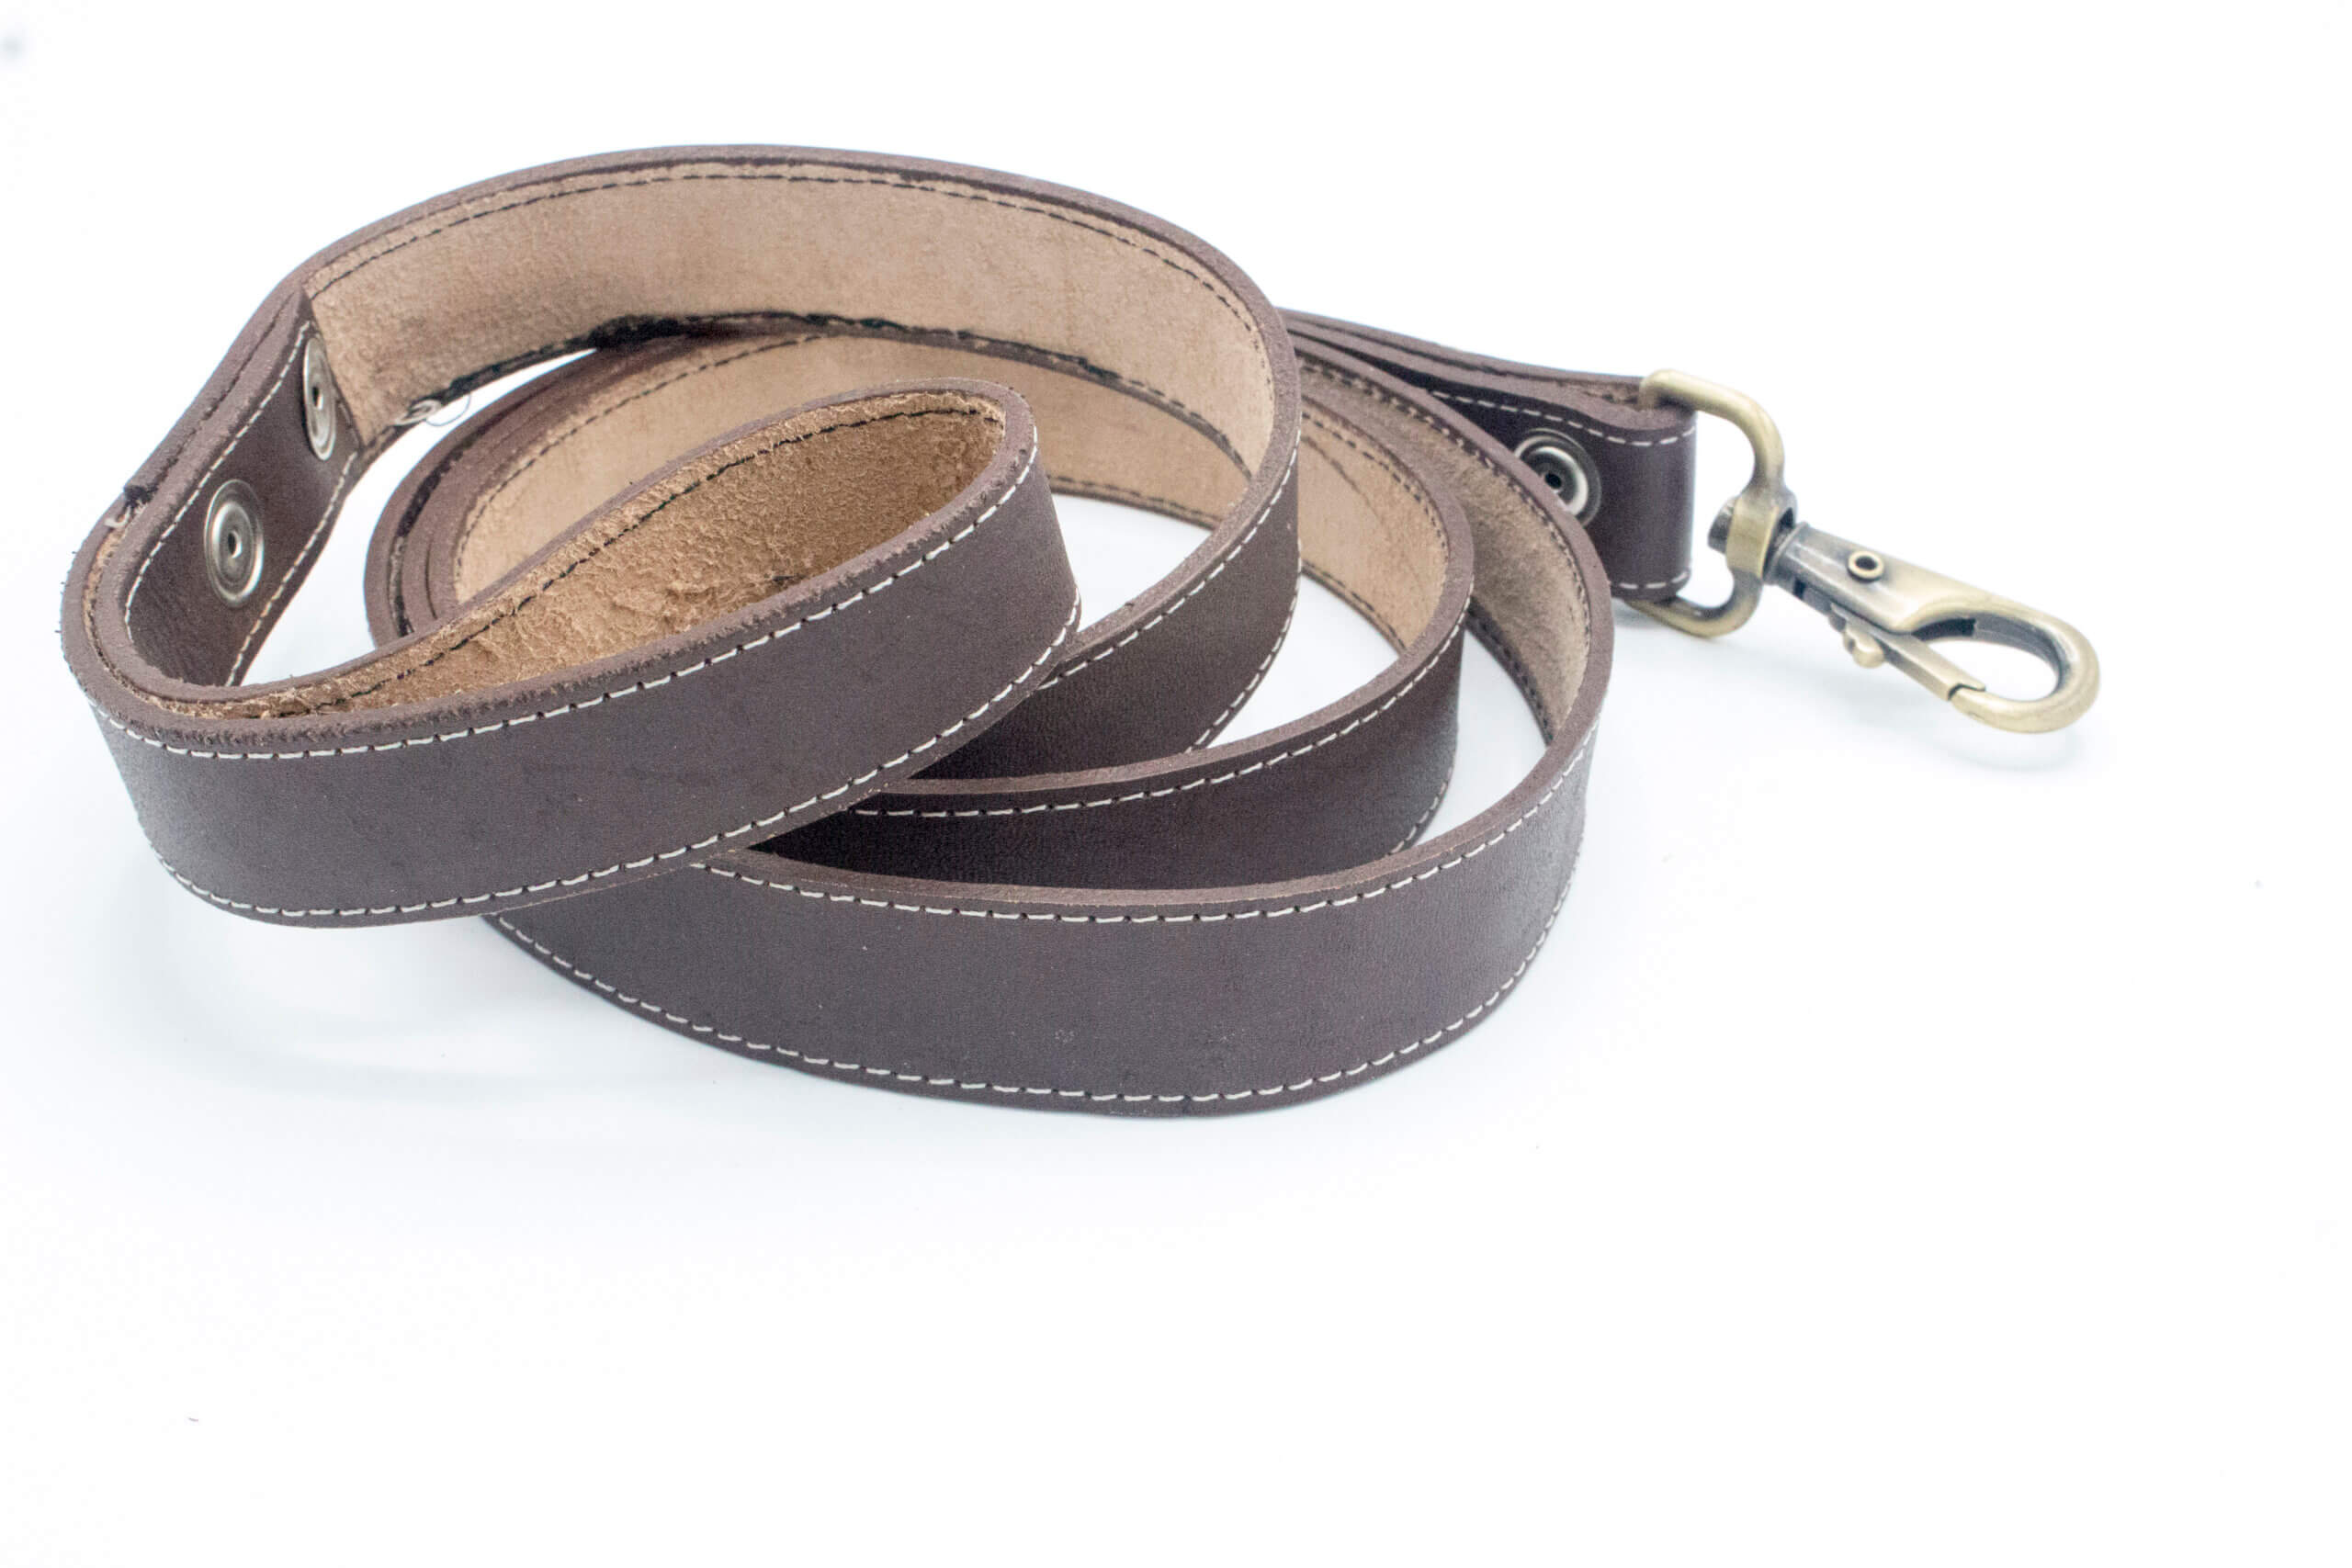 Dog Leash LEATHER Short or Long with Color Choices!!! 